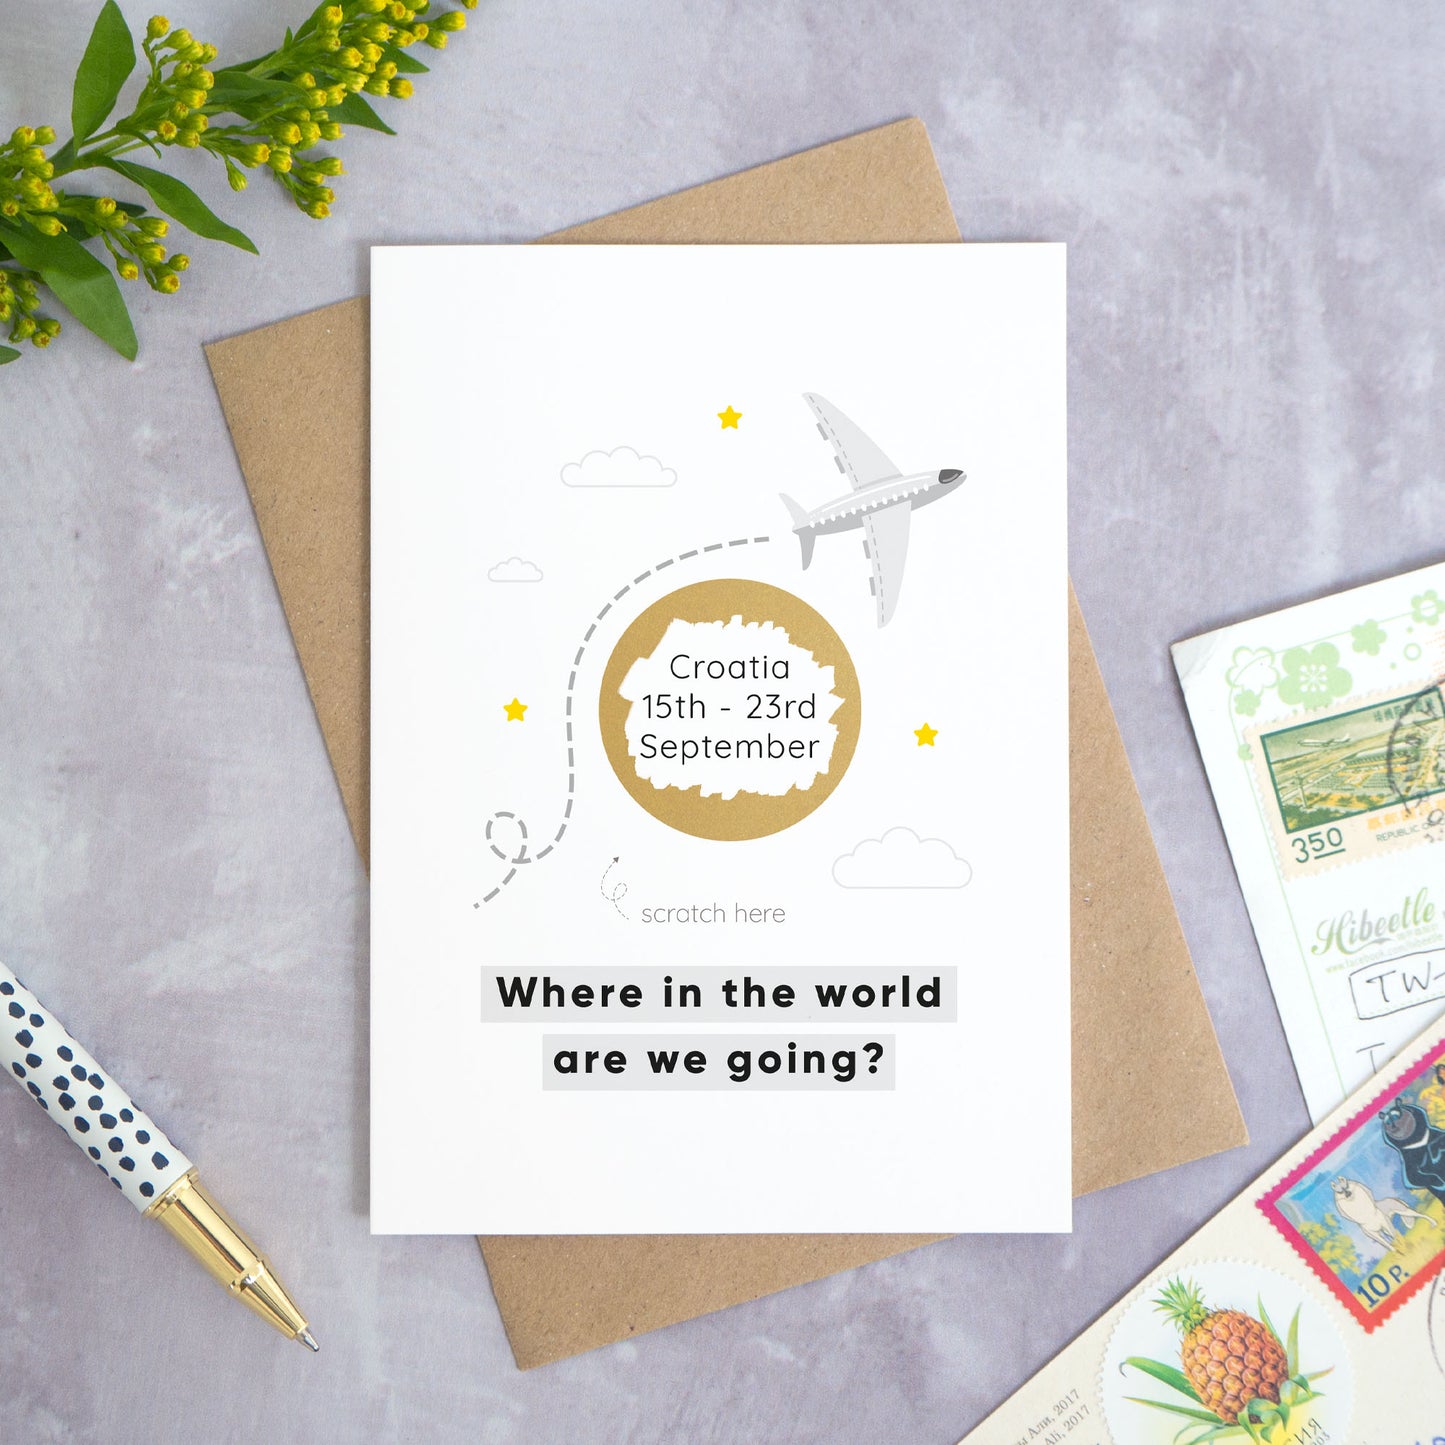 A holiday reveal scratch card featuring a plane flying over the gold scratch panel. The gold panel has been scratched off to reveal the holiday destination. Beneath the plane and scratch panel the text reads: “where in the world are we going”. This card has been shot on a grey background with a pen and foliage. This is the grey colour palette